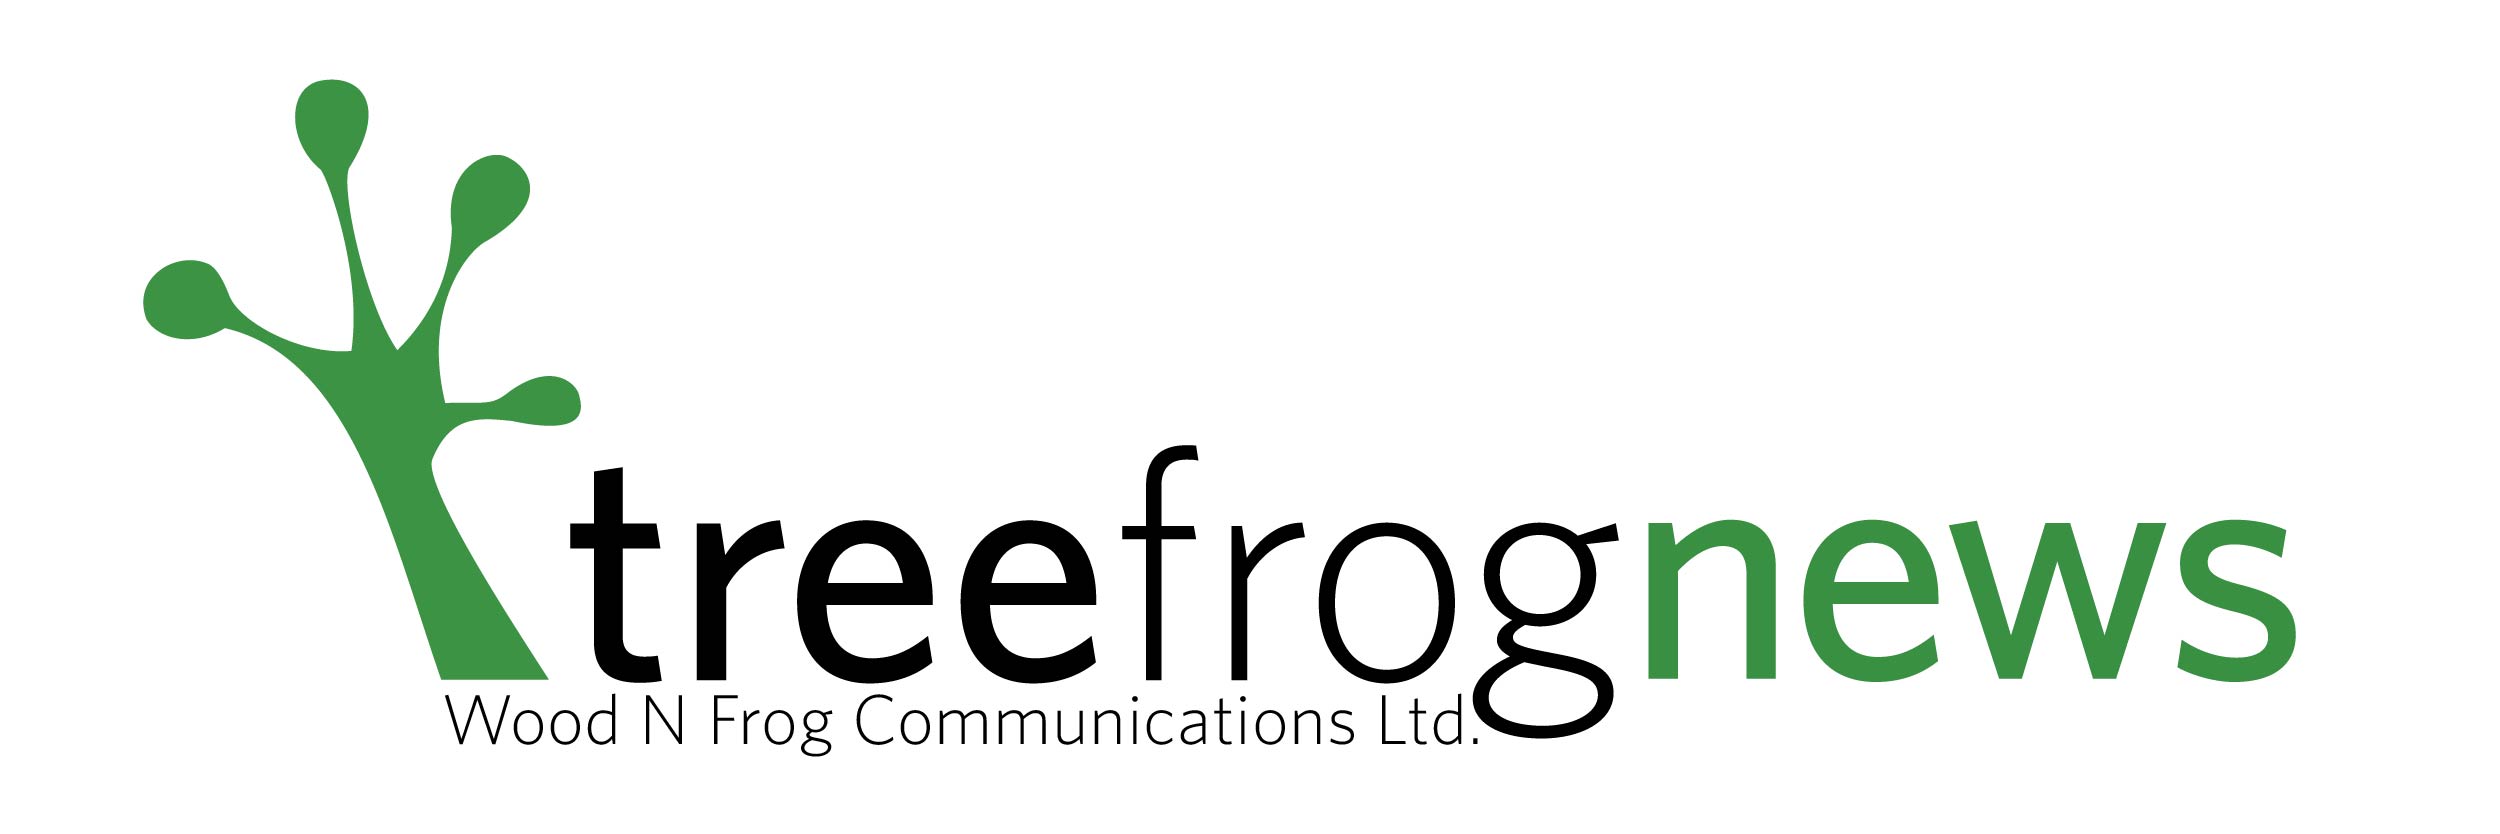 Welcome to The Tree Frog Forestry News - Tree Frog creative